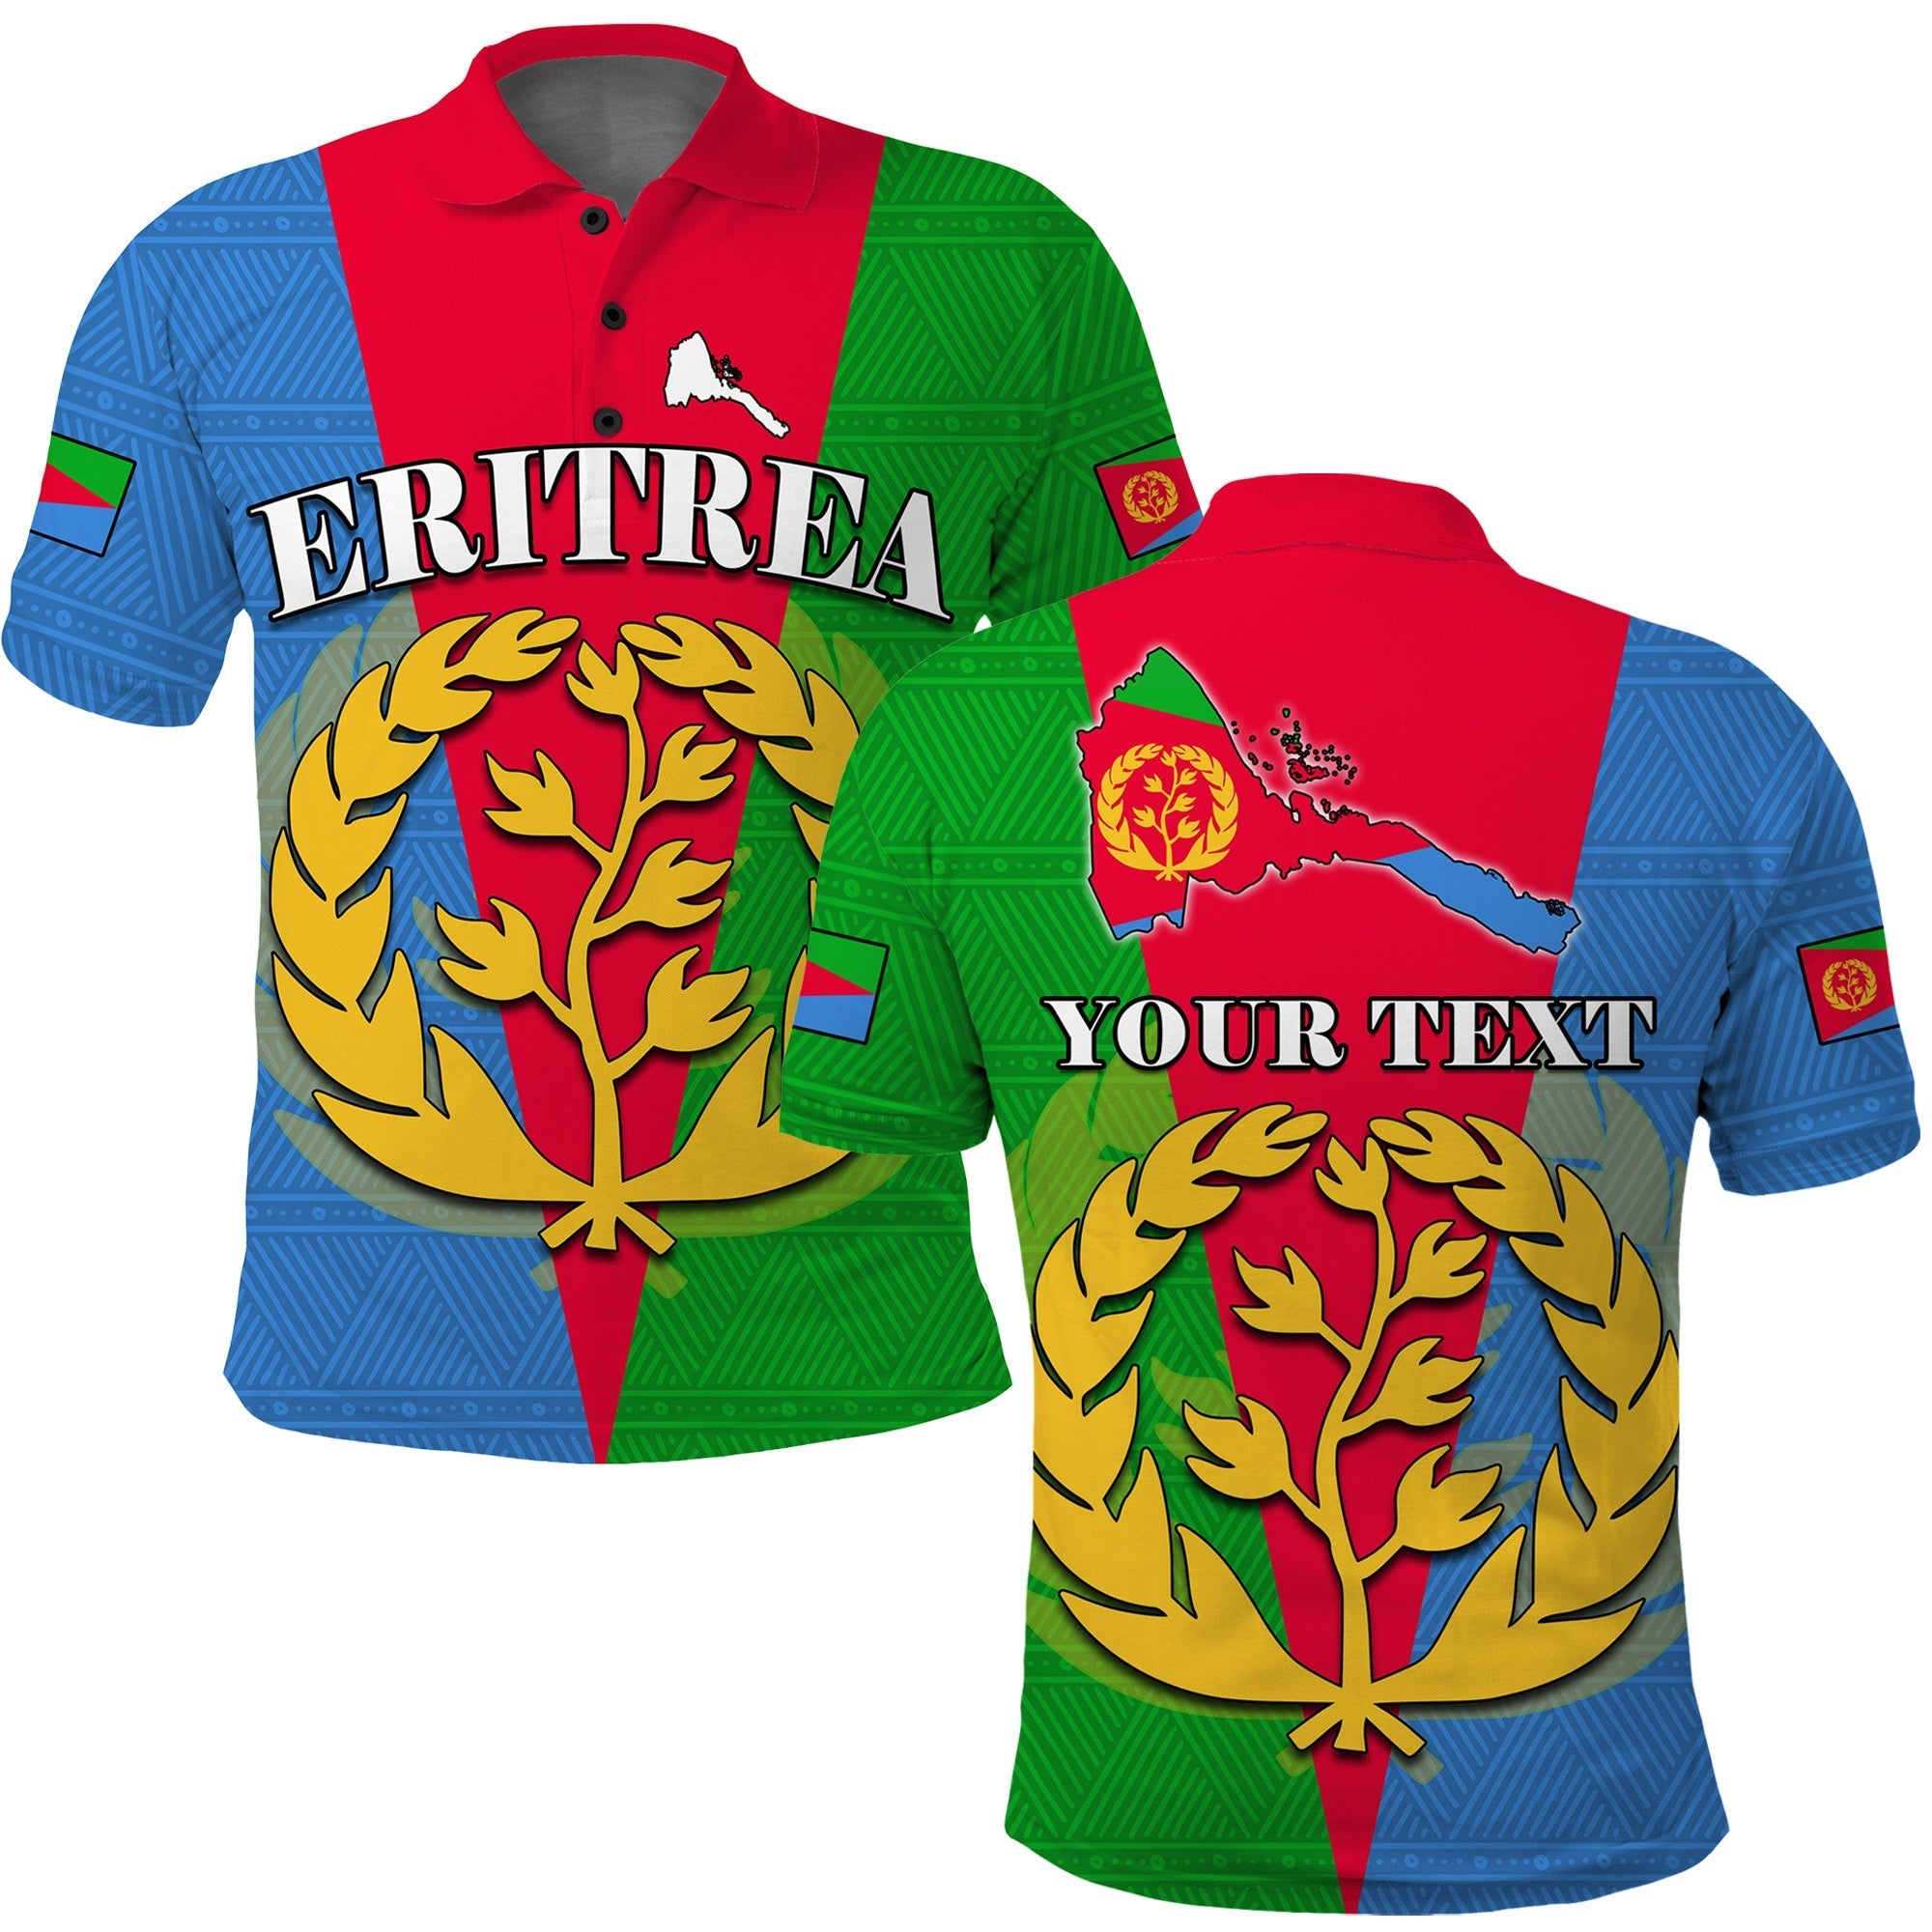 custom-personalised-eritrea-polo-shirt-eritrean-map-mix-african-pattern-simple-style